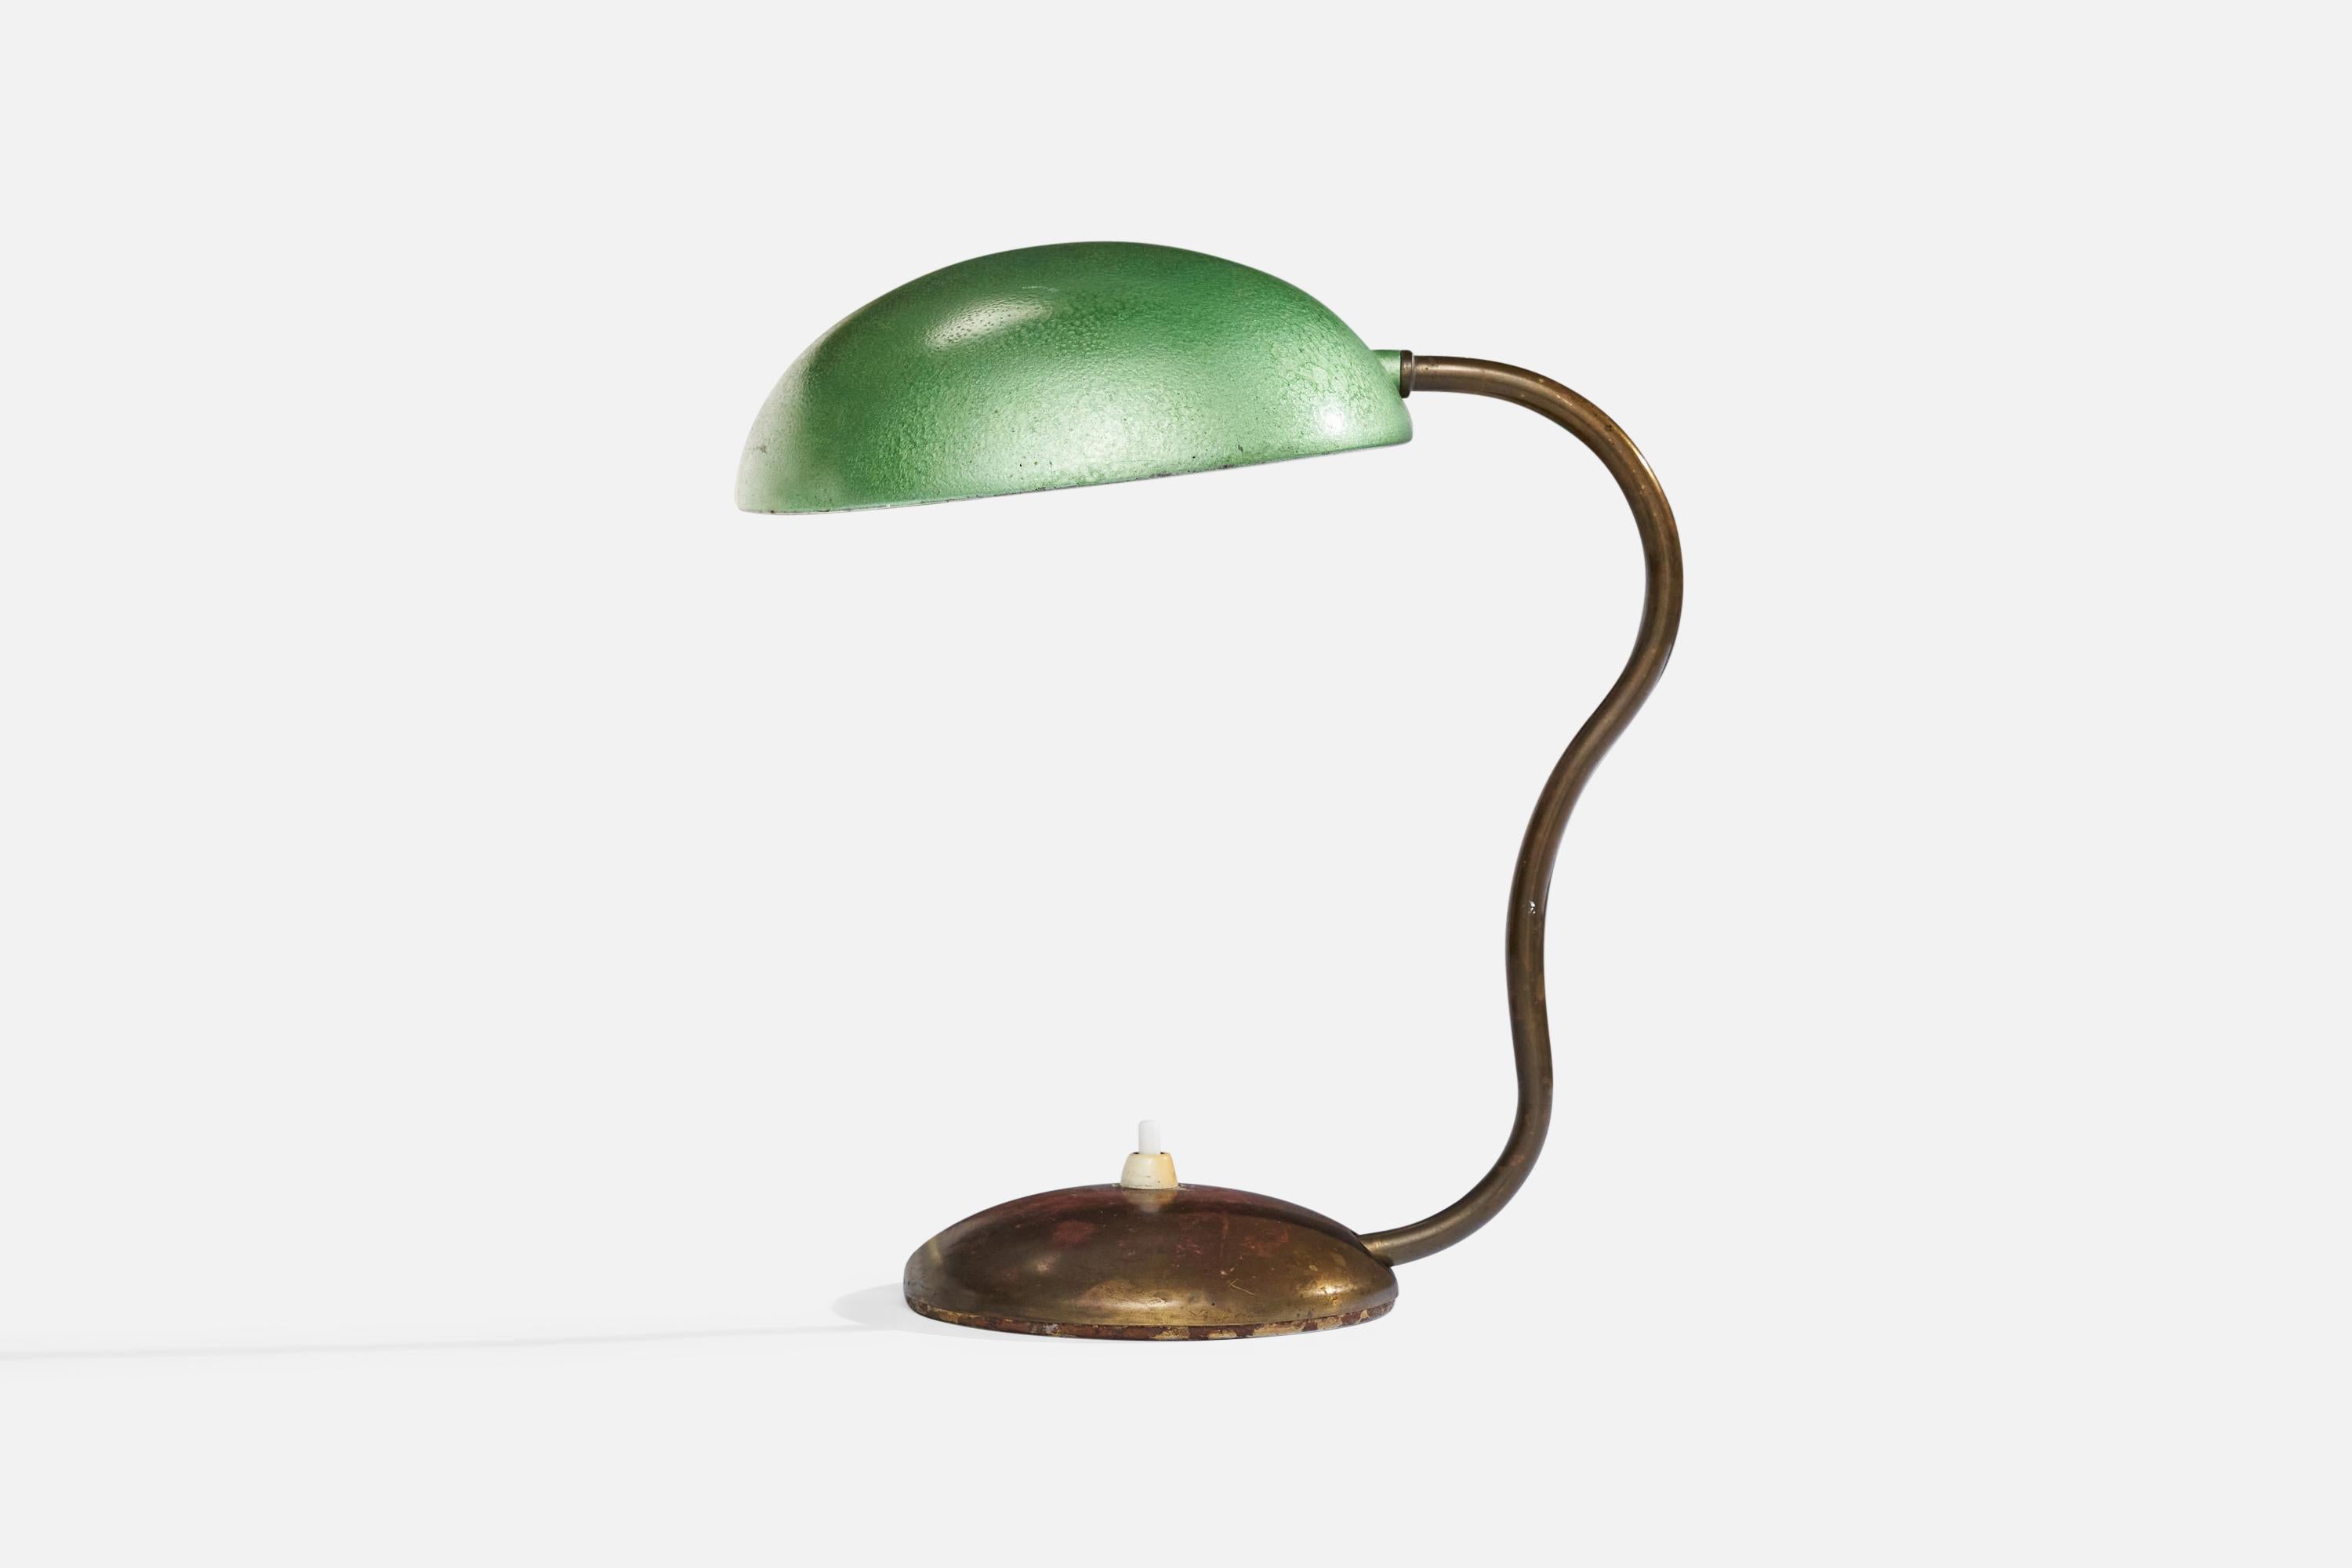 A brass and green-lacquered metal table lamp designed and produced by ASEA, Sweden, 1940s.

Overall Dimensions (inches): 11” H x 7” W x 9.75” D
Stated dimensions include shade.
Bulb Specifications: E-26 Bulb
Number of Sockets: 1
All lighting will be